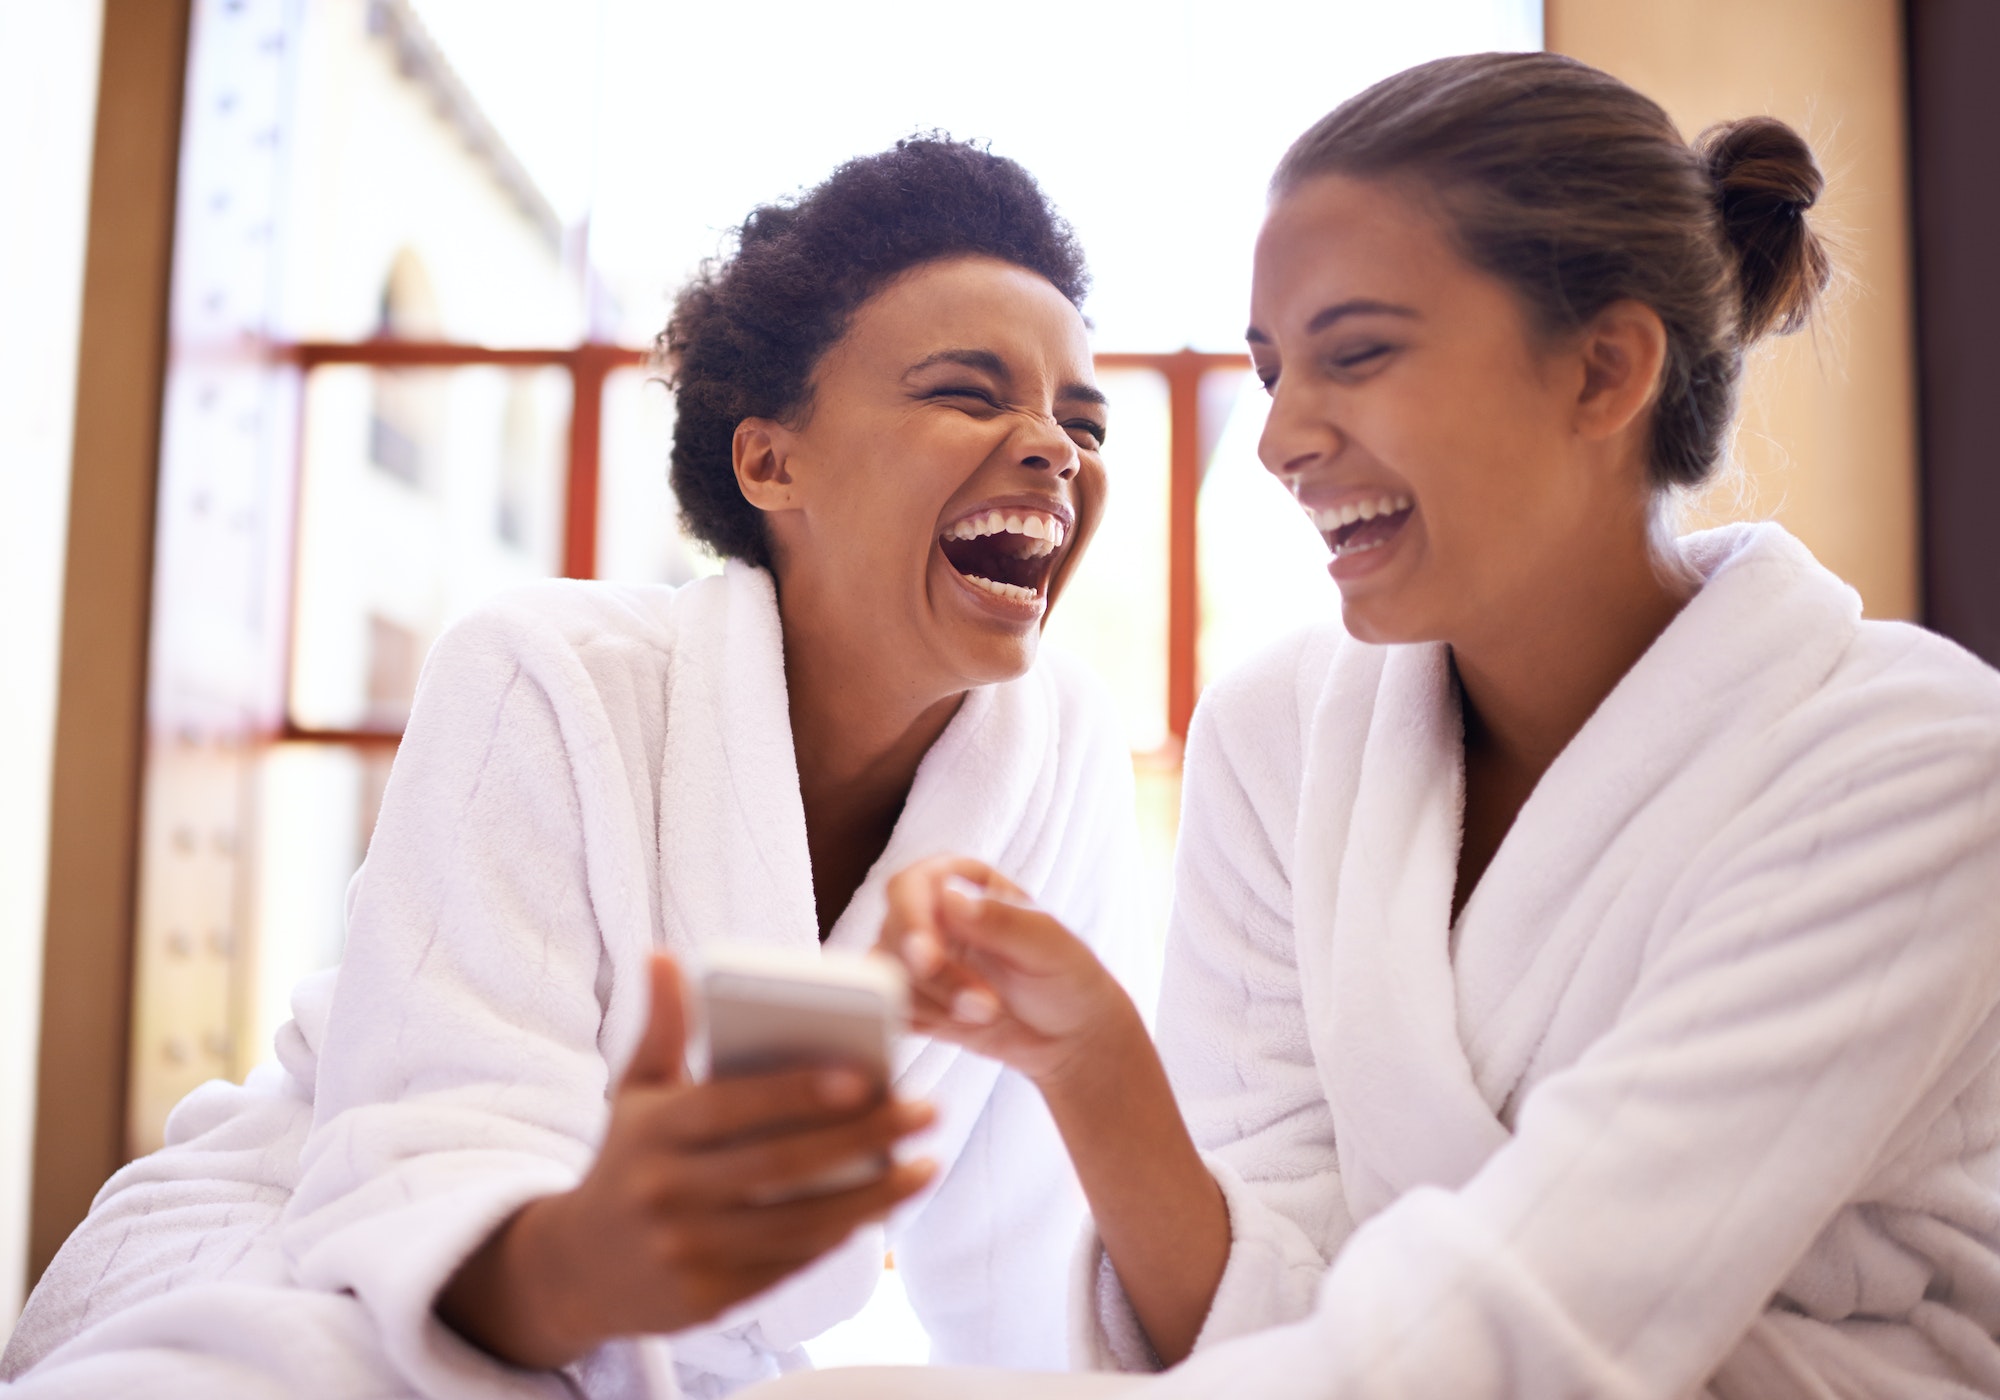 Girls day at the spa. Shot of two friends in bathrobes using a cellphone at a spa.